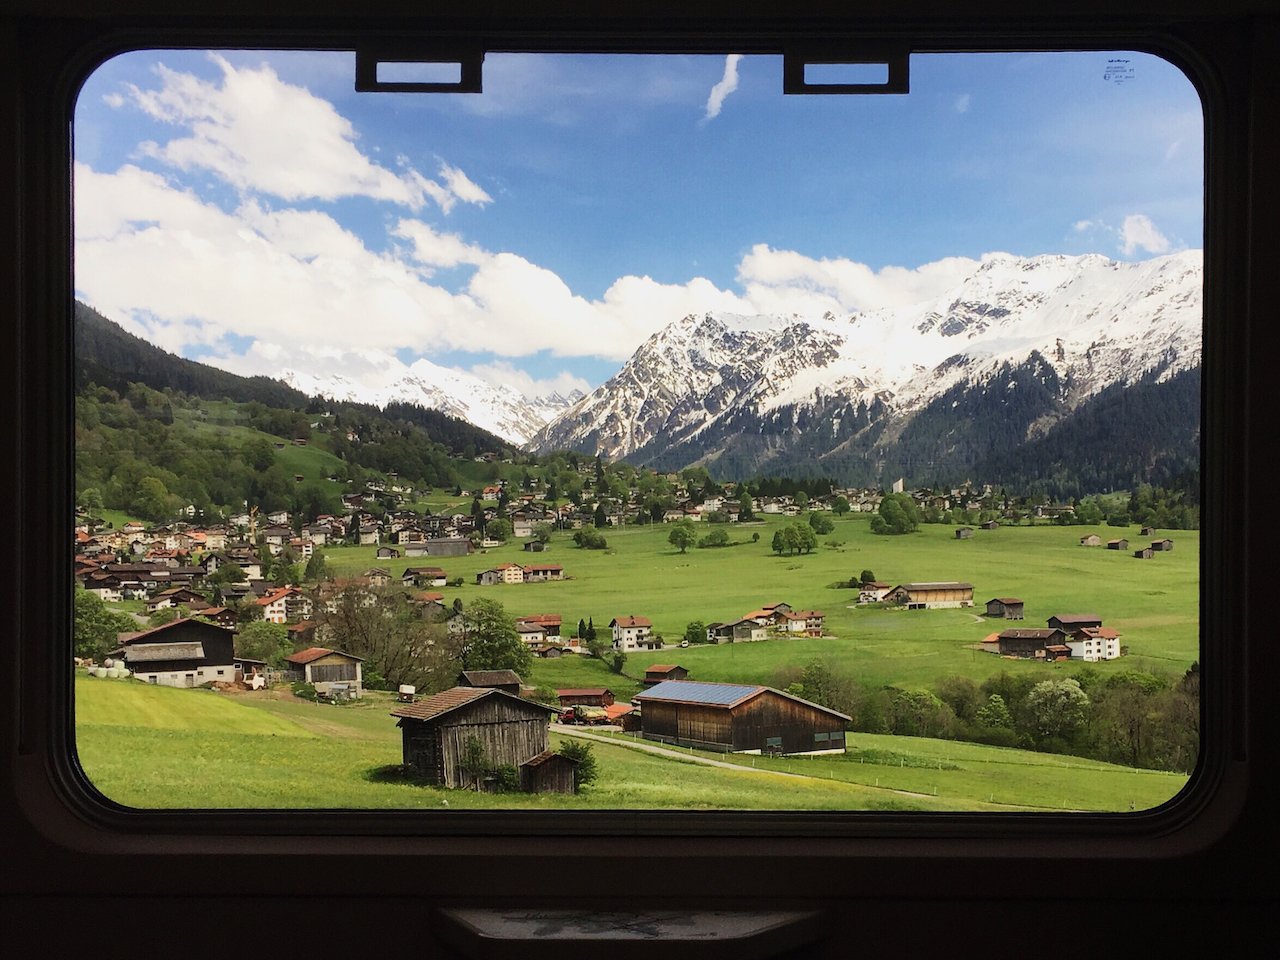 The Swiss rail system is so extensive, efficient and fun to use that it's easy not to drive in favor of views like this en route to St. Moritz.  (Photo: Kat Tancock)